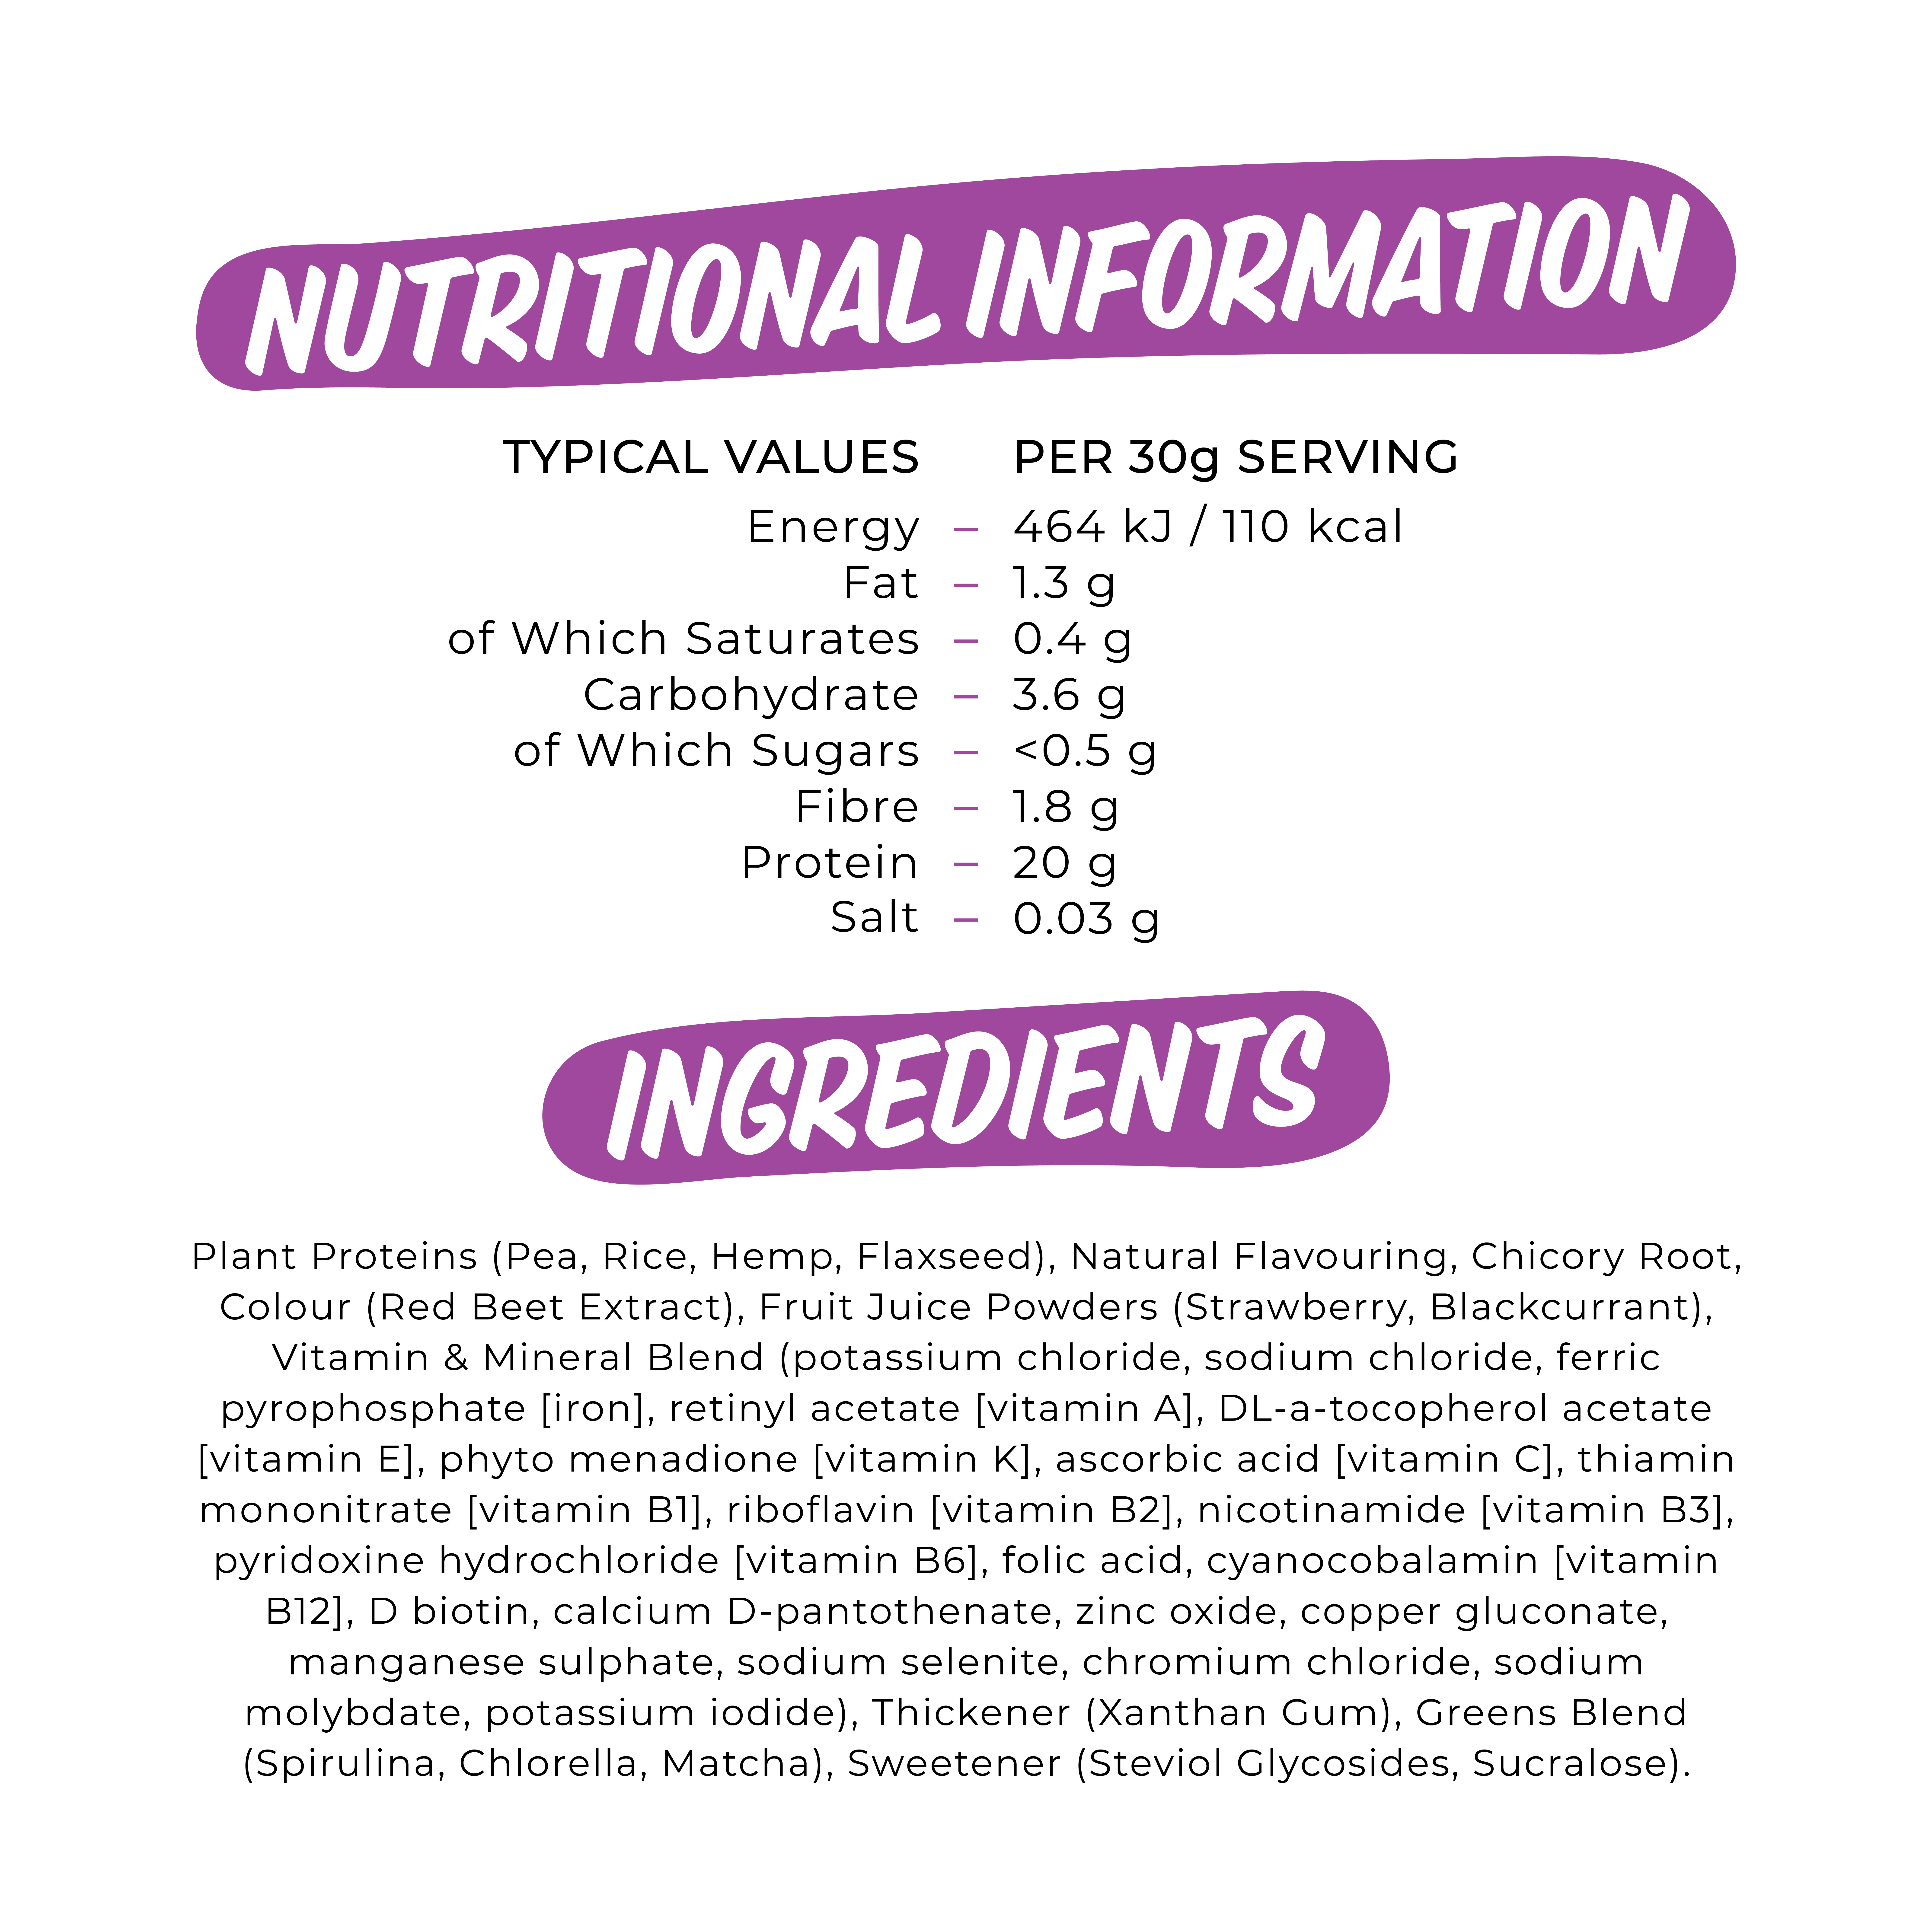 TYPICAL VALUES PER 30g SERVING Energy 464 kJ /110 kcal Fat 1.3 g of Which Saturates 0.4 g Carbohydrate 3.6 g of Which Sugars <0.5 g Fibre 1.8 g Protein 20 g Salt 0.03 g 
                                  Plant Proteins (Pea, Rice, Hemp, Flaxseed), Natural Flavouring, Chicory Root, Colour (Red Beet Extract), Fruit Juice Powders (Strawberry, Blackcurrant), Vitamin & Mineral Blend (potassium chloride, sodium chloride, ferric pyrophosphate [iron], retinyl acetate [vitamin A], DL-a-tocopherol acetate [vitamin E], phyto menadione [vitamin K], ascorbic acid [vitamin C], thiamin mononitrate [vitamin Bl], riboflavin [vitamin B2], nicotinamide [vitamin B3], pyridoxine hydrochloride [vitamin B6], folic acid, cyanocobalamin [vitamin B12], D biotin, calcium D-pantothenate, zinc oxide, copper gluconate, manganese sulphate, sodium selenite, chromium chloride, sodium molybdate, potassium iodide), Thickener (Xanthan Gum), Greens Blend (Spirulina, Chlorella, Matcha), Sweetener (Steviol Glycosides, Sucralose). 

                                  